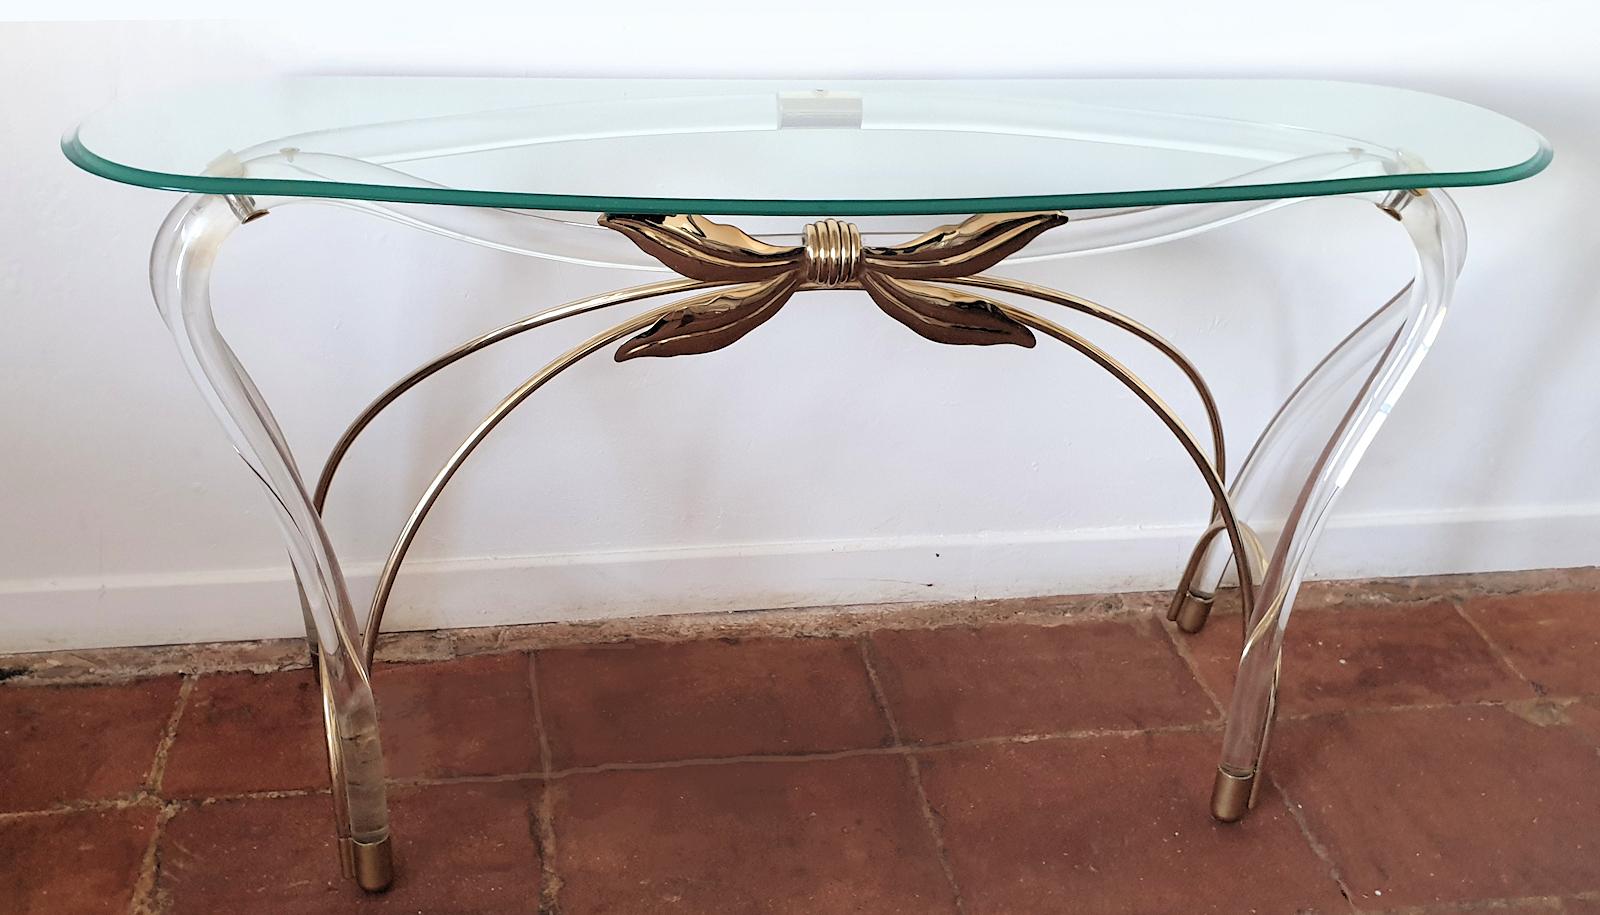 Large Mid-Century Modern console table, with organic design and shape, Spain, 1970s.
Made of glass beveled top, brass and Lucite legs.
Doesn't need to be fixed on the wall.
Very good condition.
Almost Art Nouveau style, with a modern touch.